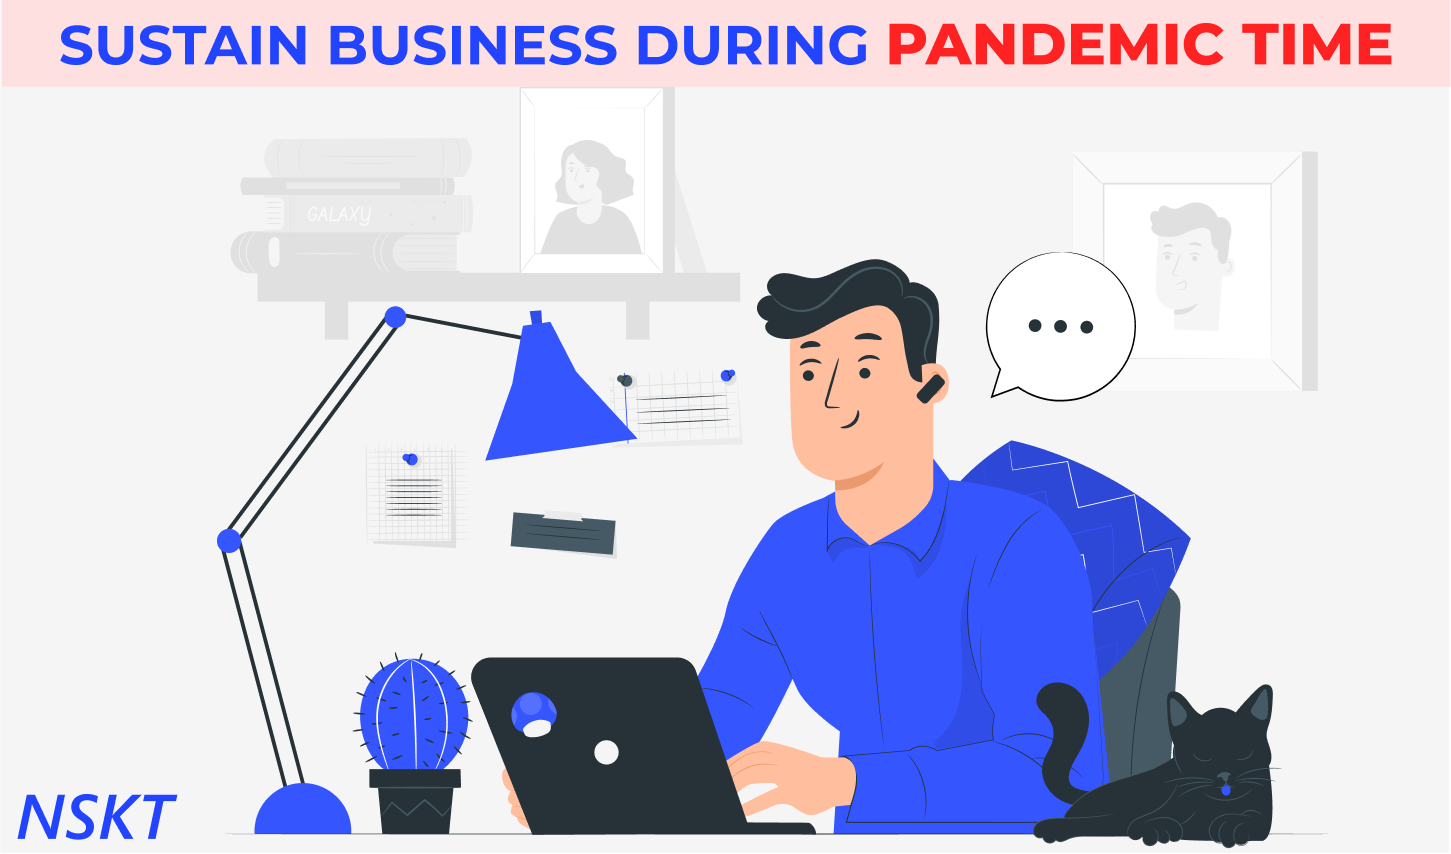 How business advisory services will help your business sustain during this pandemic time?